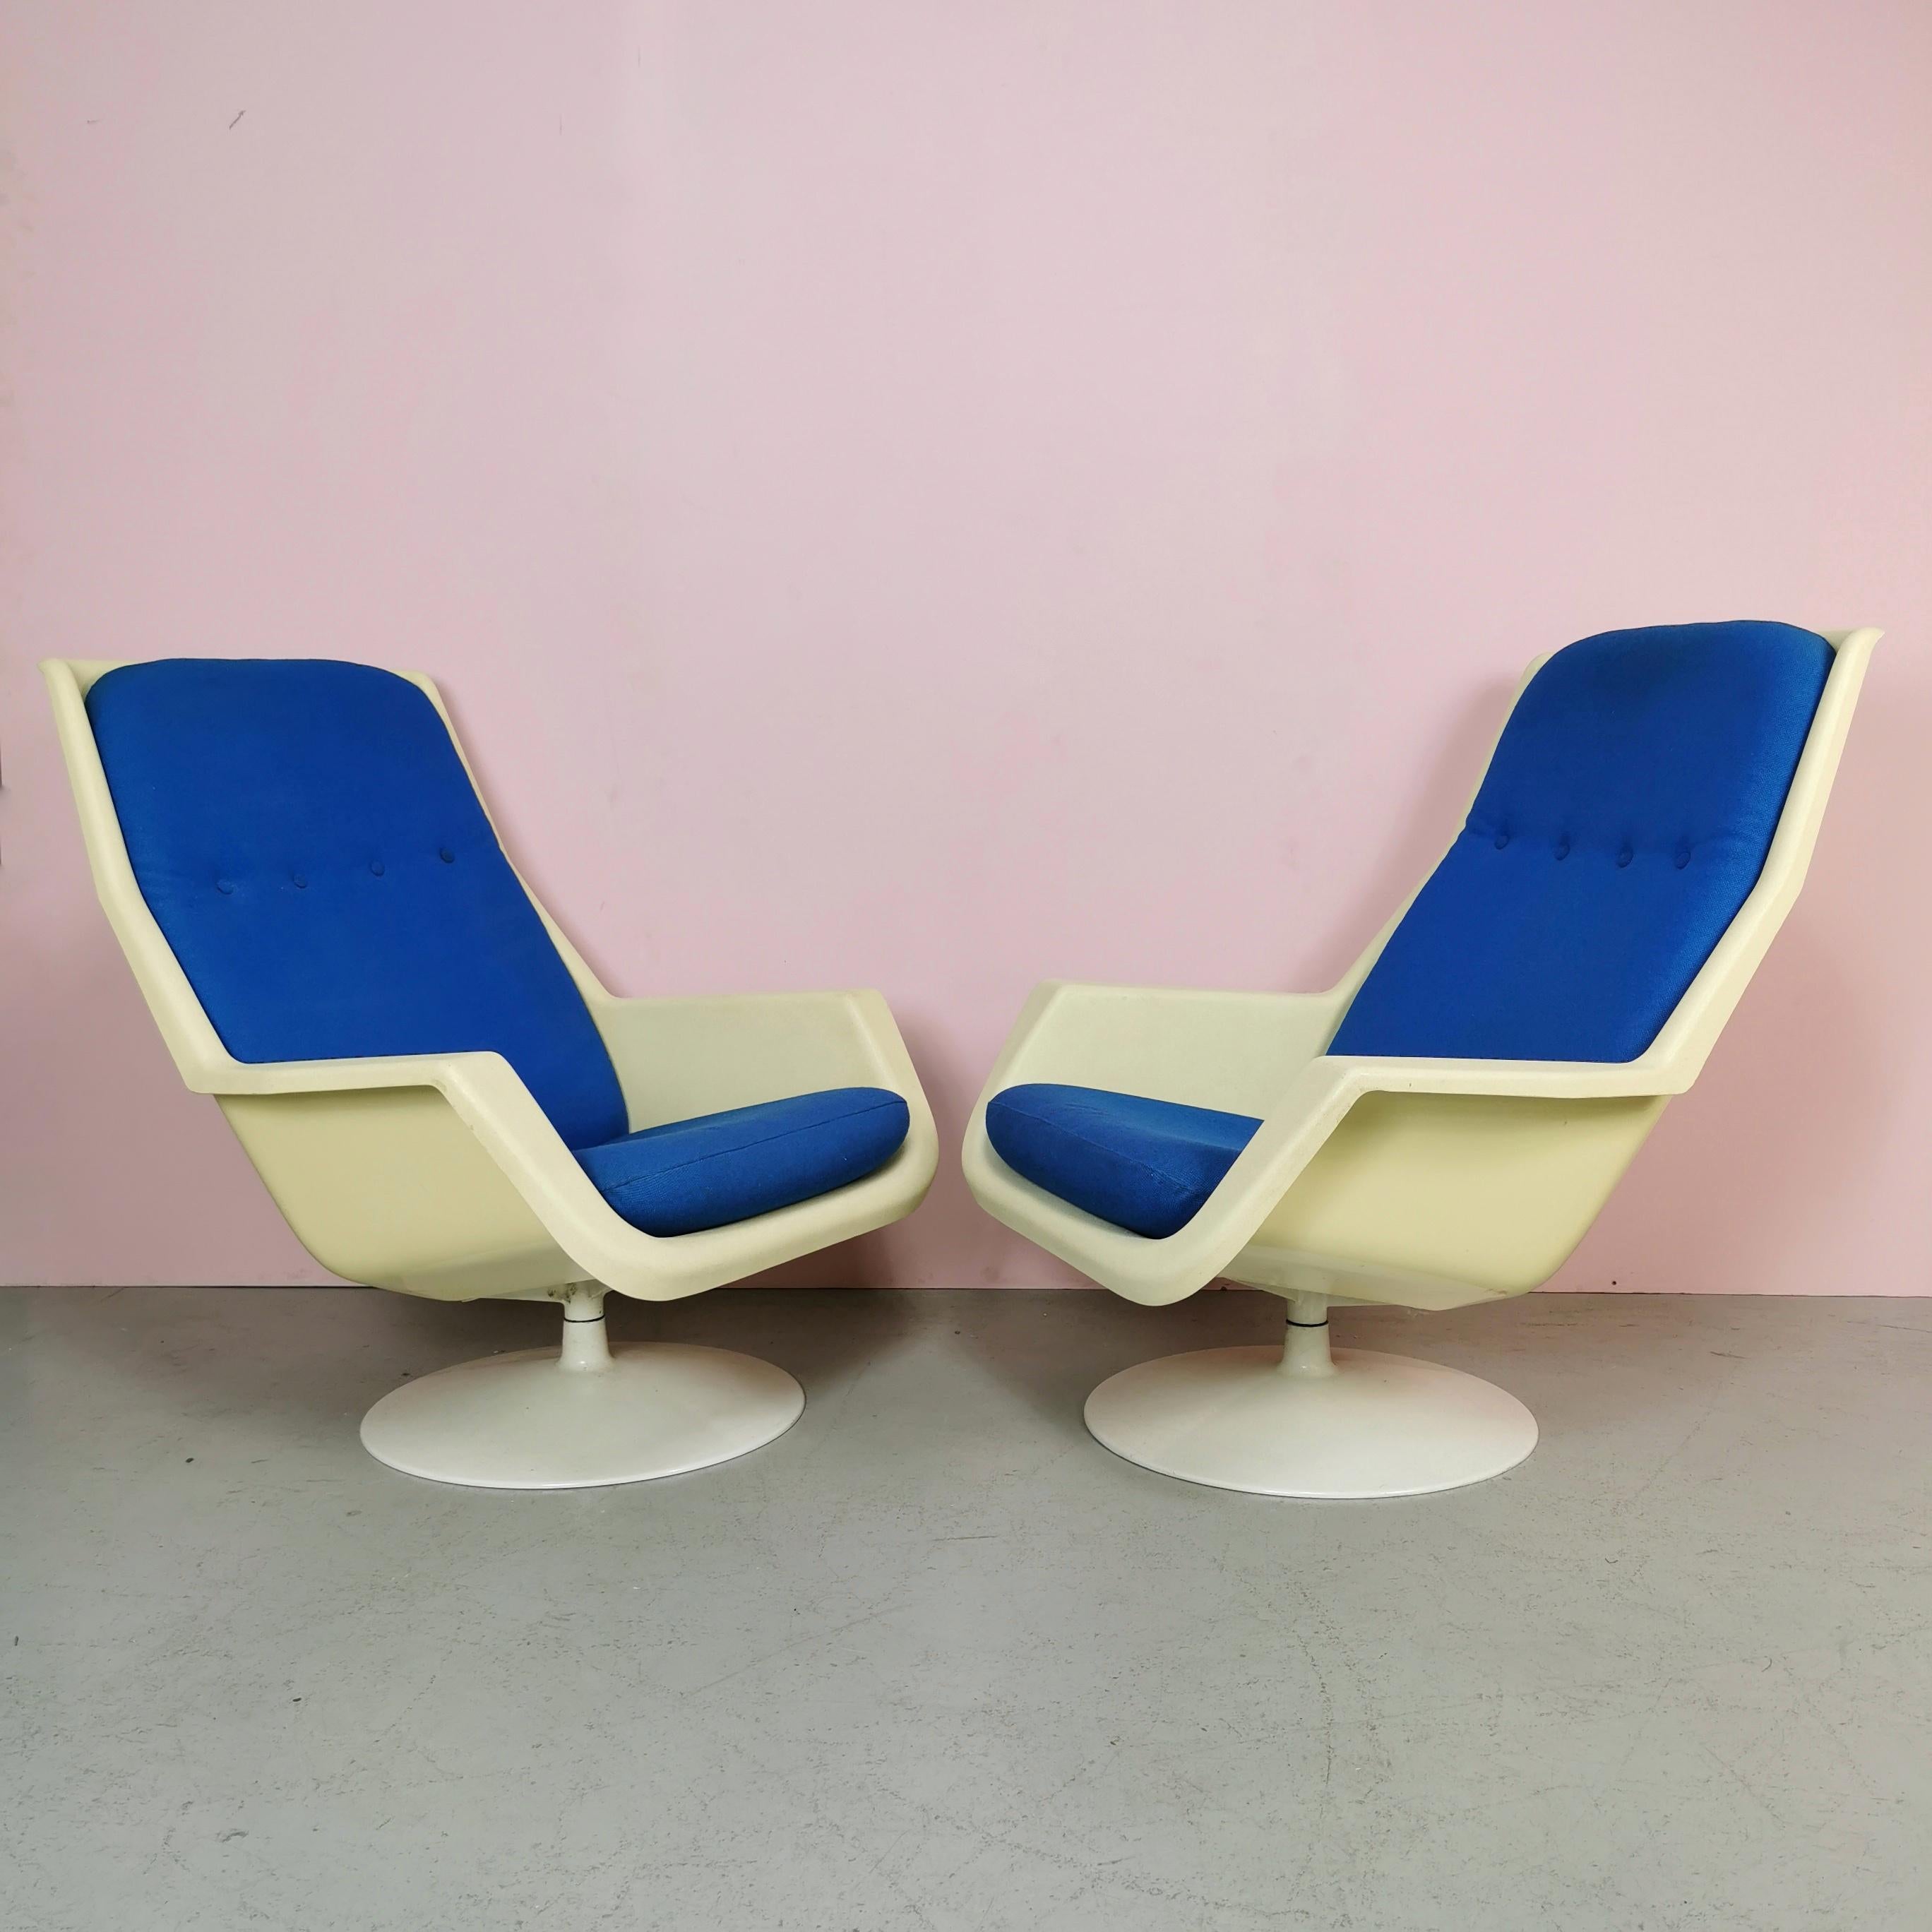 ara pair of Armchairs manufactured in England by Hille and designed by Robin Day in the early 1970s. Metal Base, Shaped Plastic Shell and Blue Fabric Cushions. The Armchairs are presented in very good condition.
have slight vintage marks
perfect